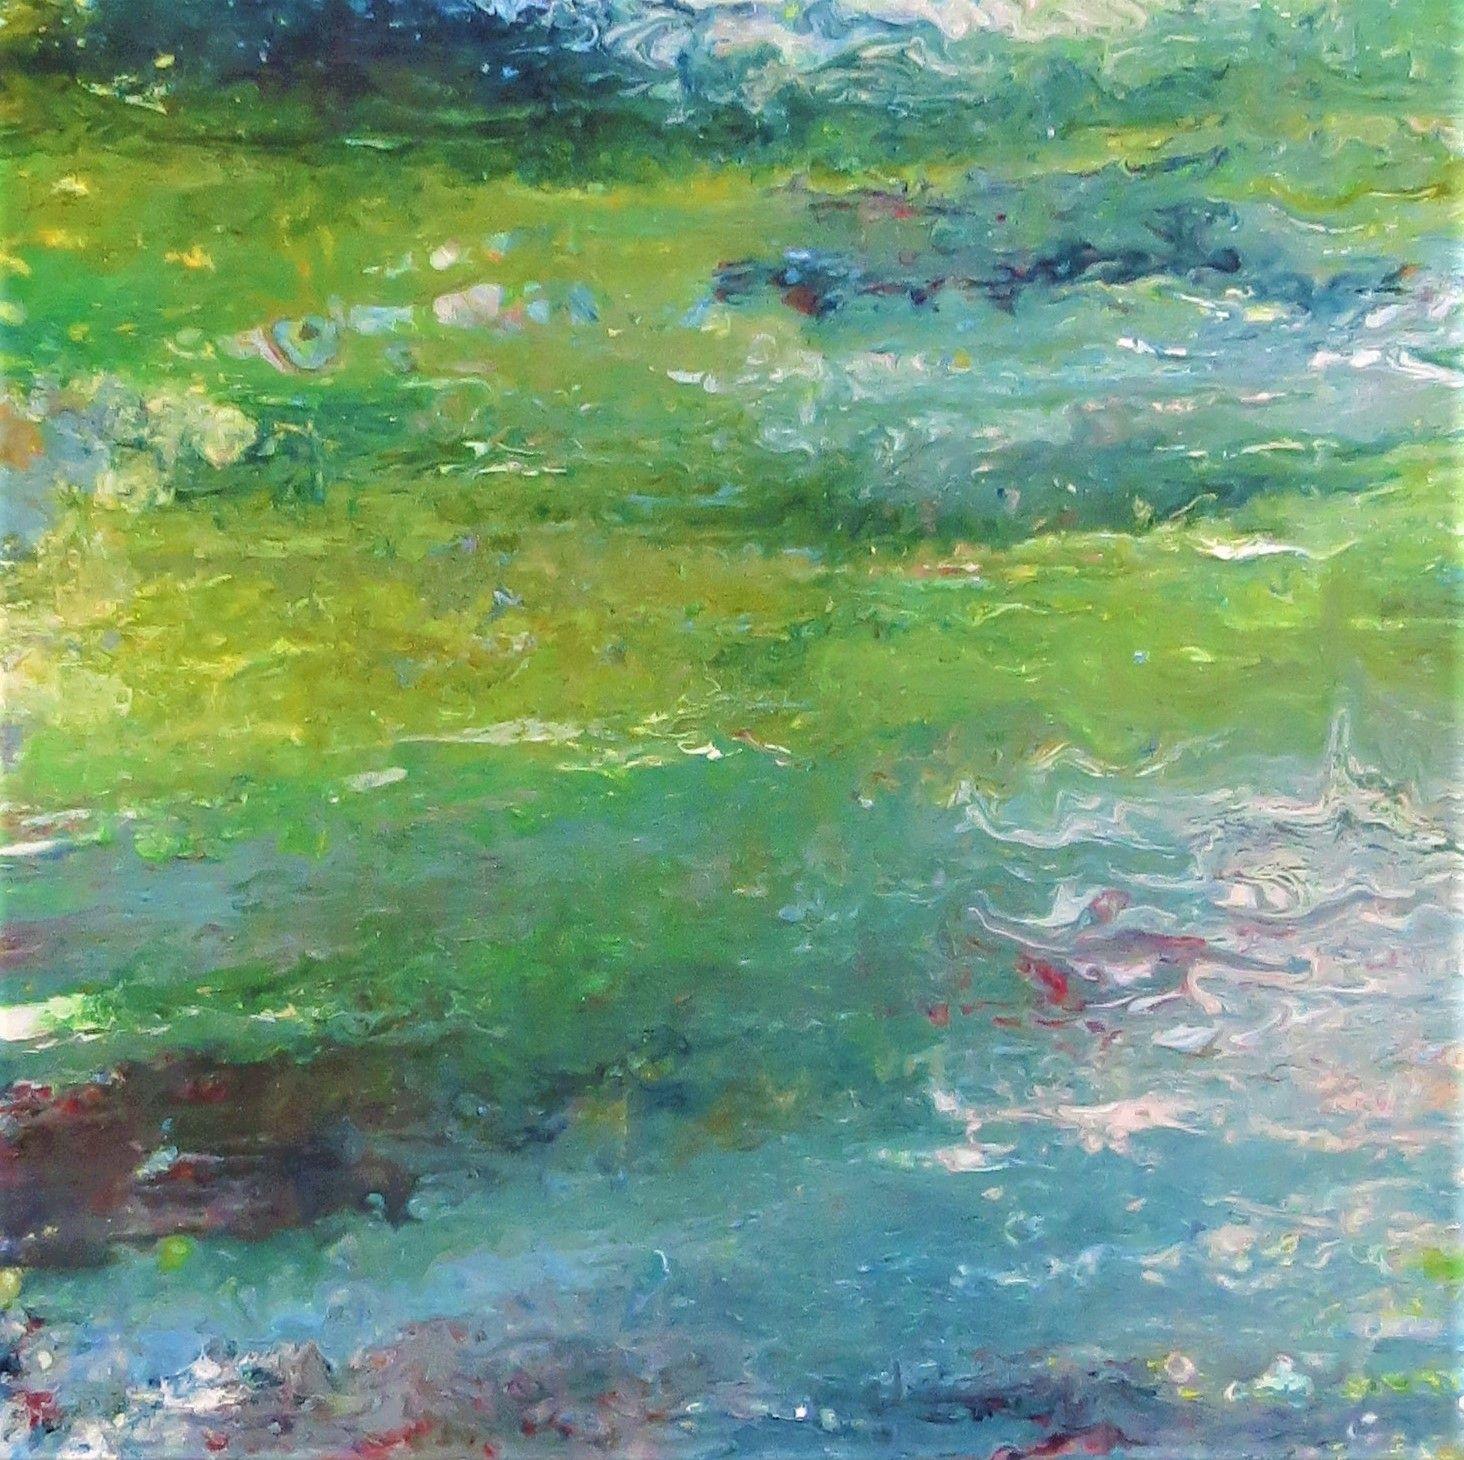 Inspired by Monet's Water Lilies. Modernized in abstract form. Warm blues and greens with highlights in red and purple. :: Painting :: Abstract Expressionism :: This piece comes with an official certificate of authenticity signed by the artist ::